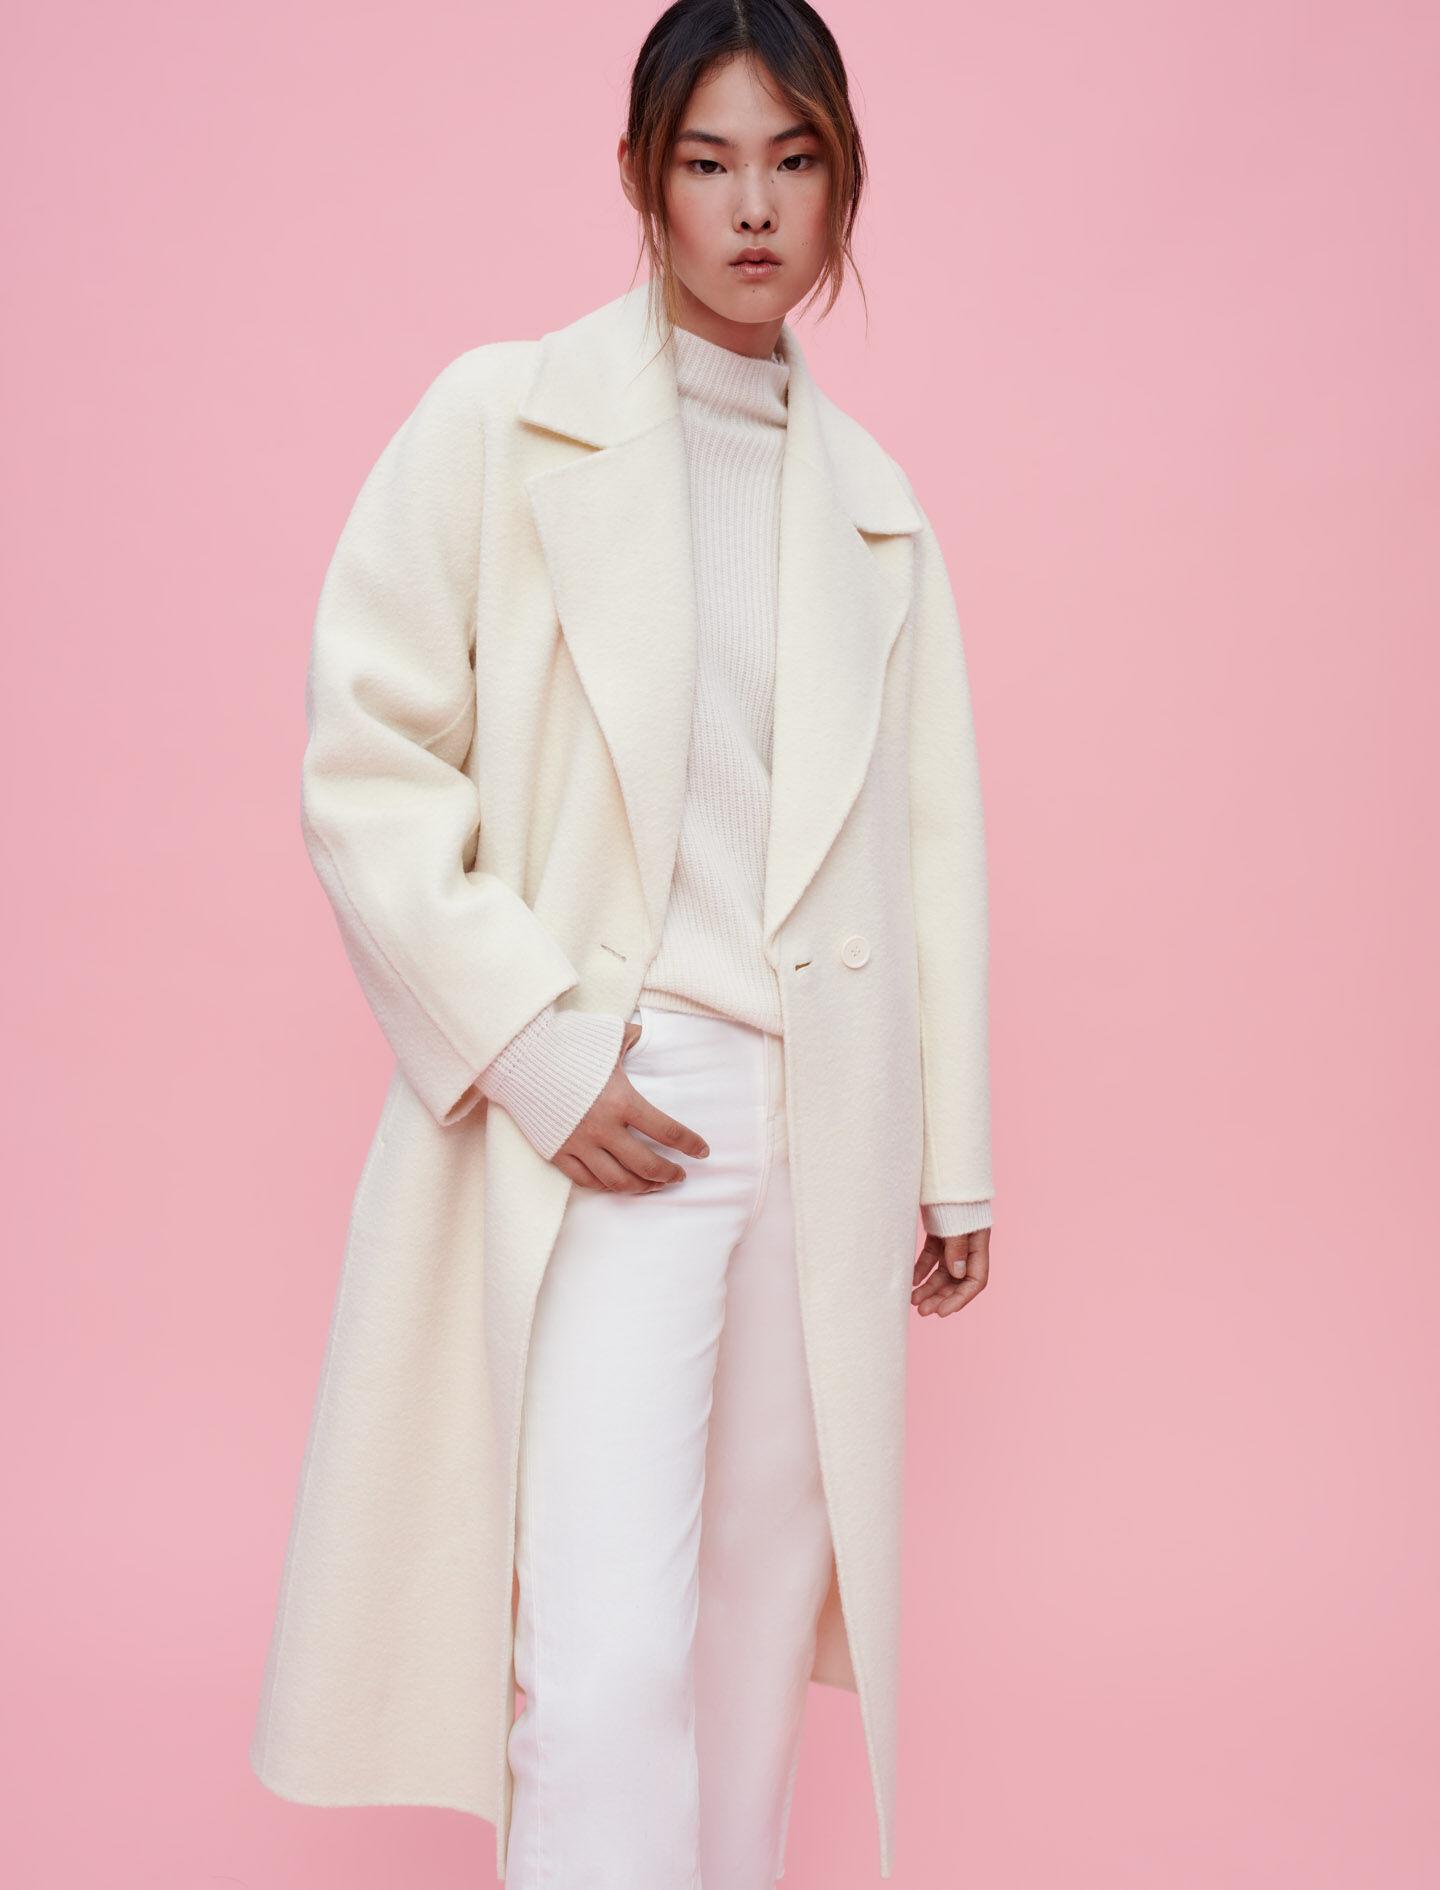 Maje Textured Double-faced Coat in Pink | Lyst